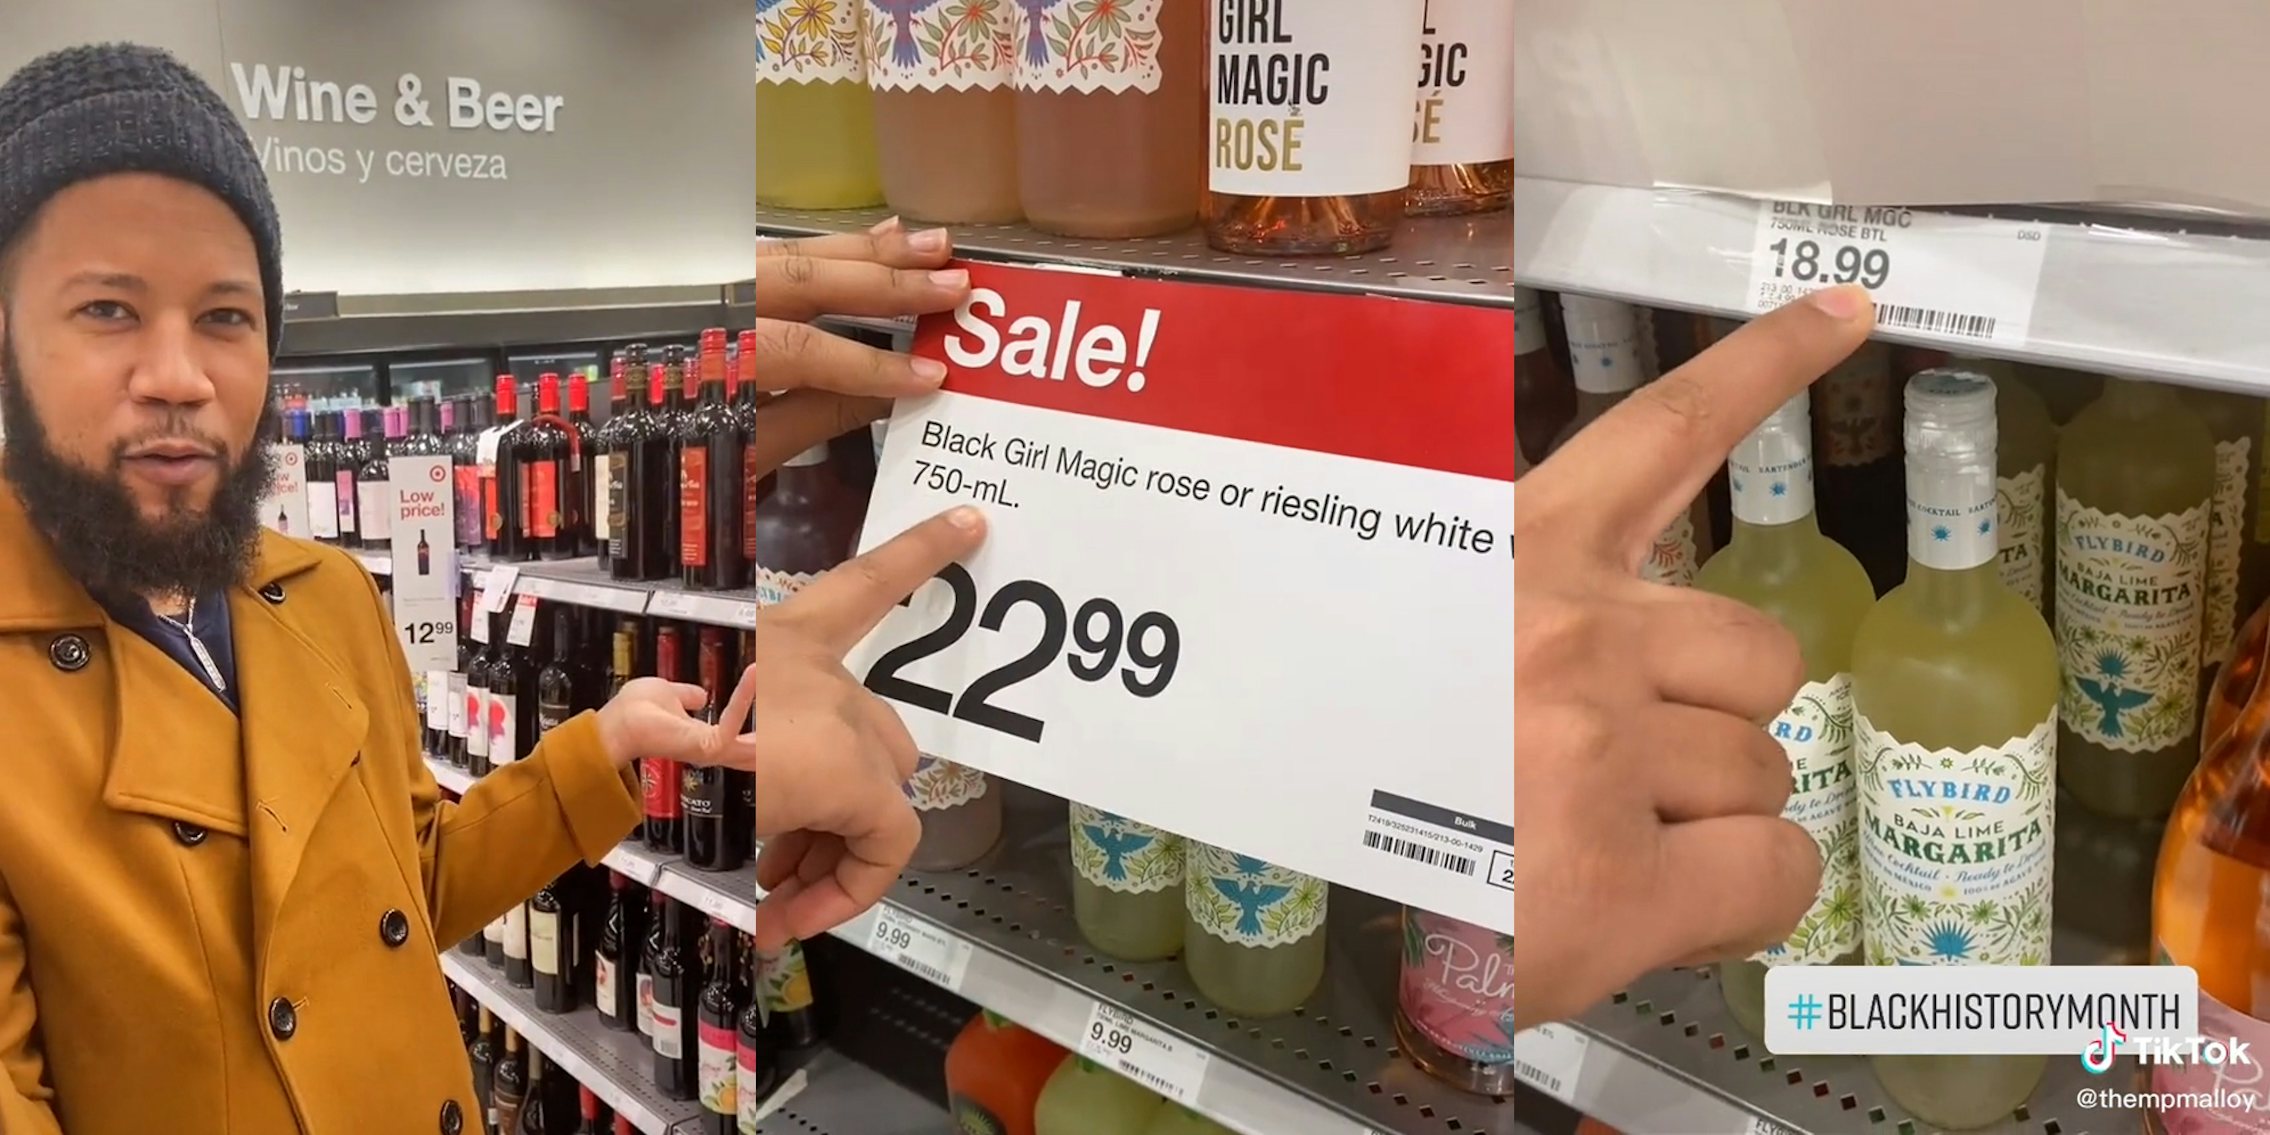 man pointing out that the 'sale' price on Black Girl Magic wine is 22.99, while the regular price is lower at 18.99